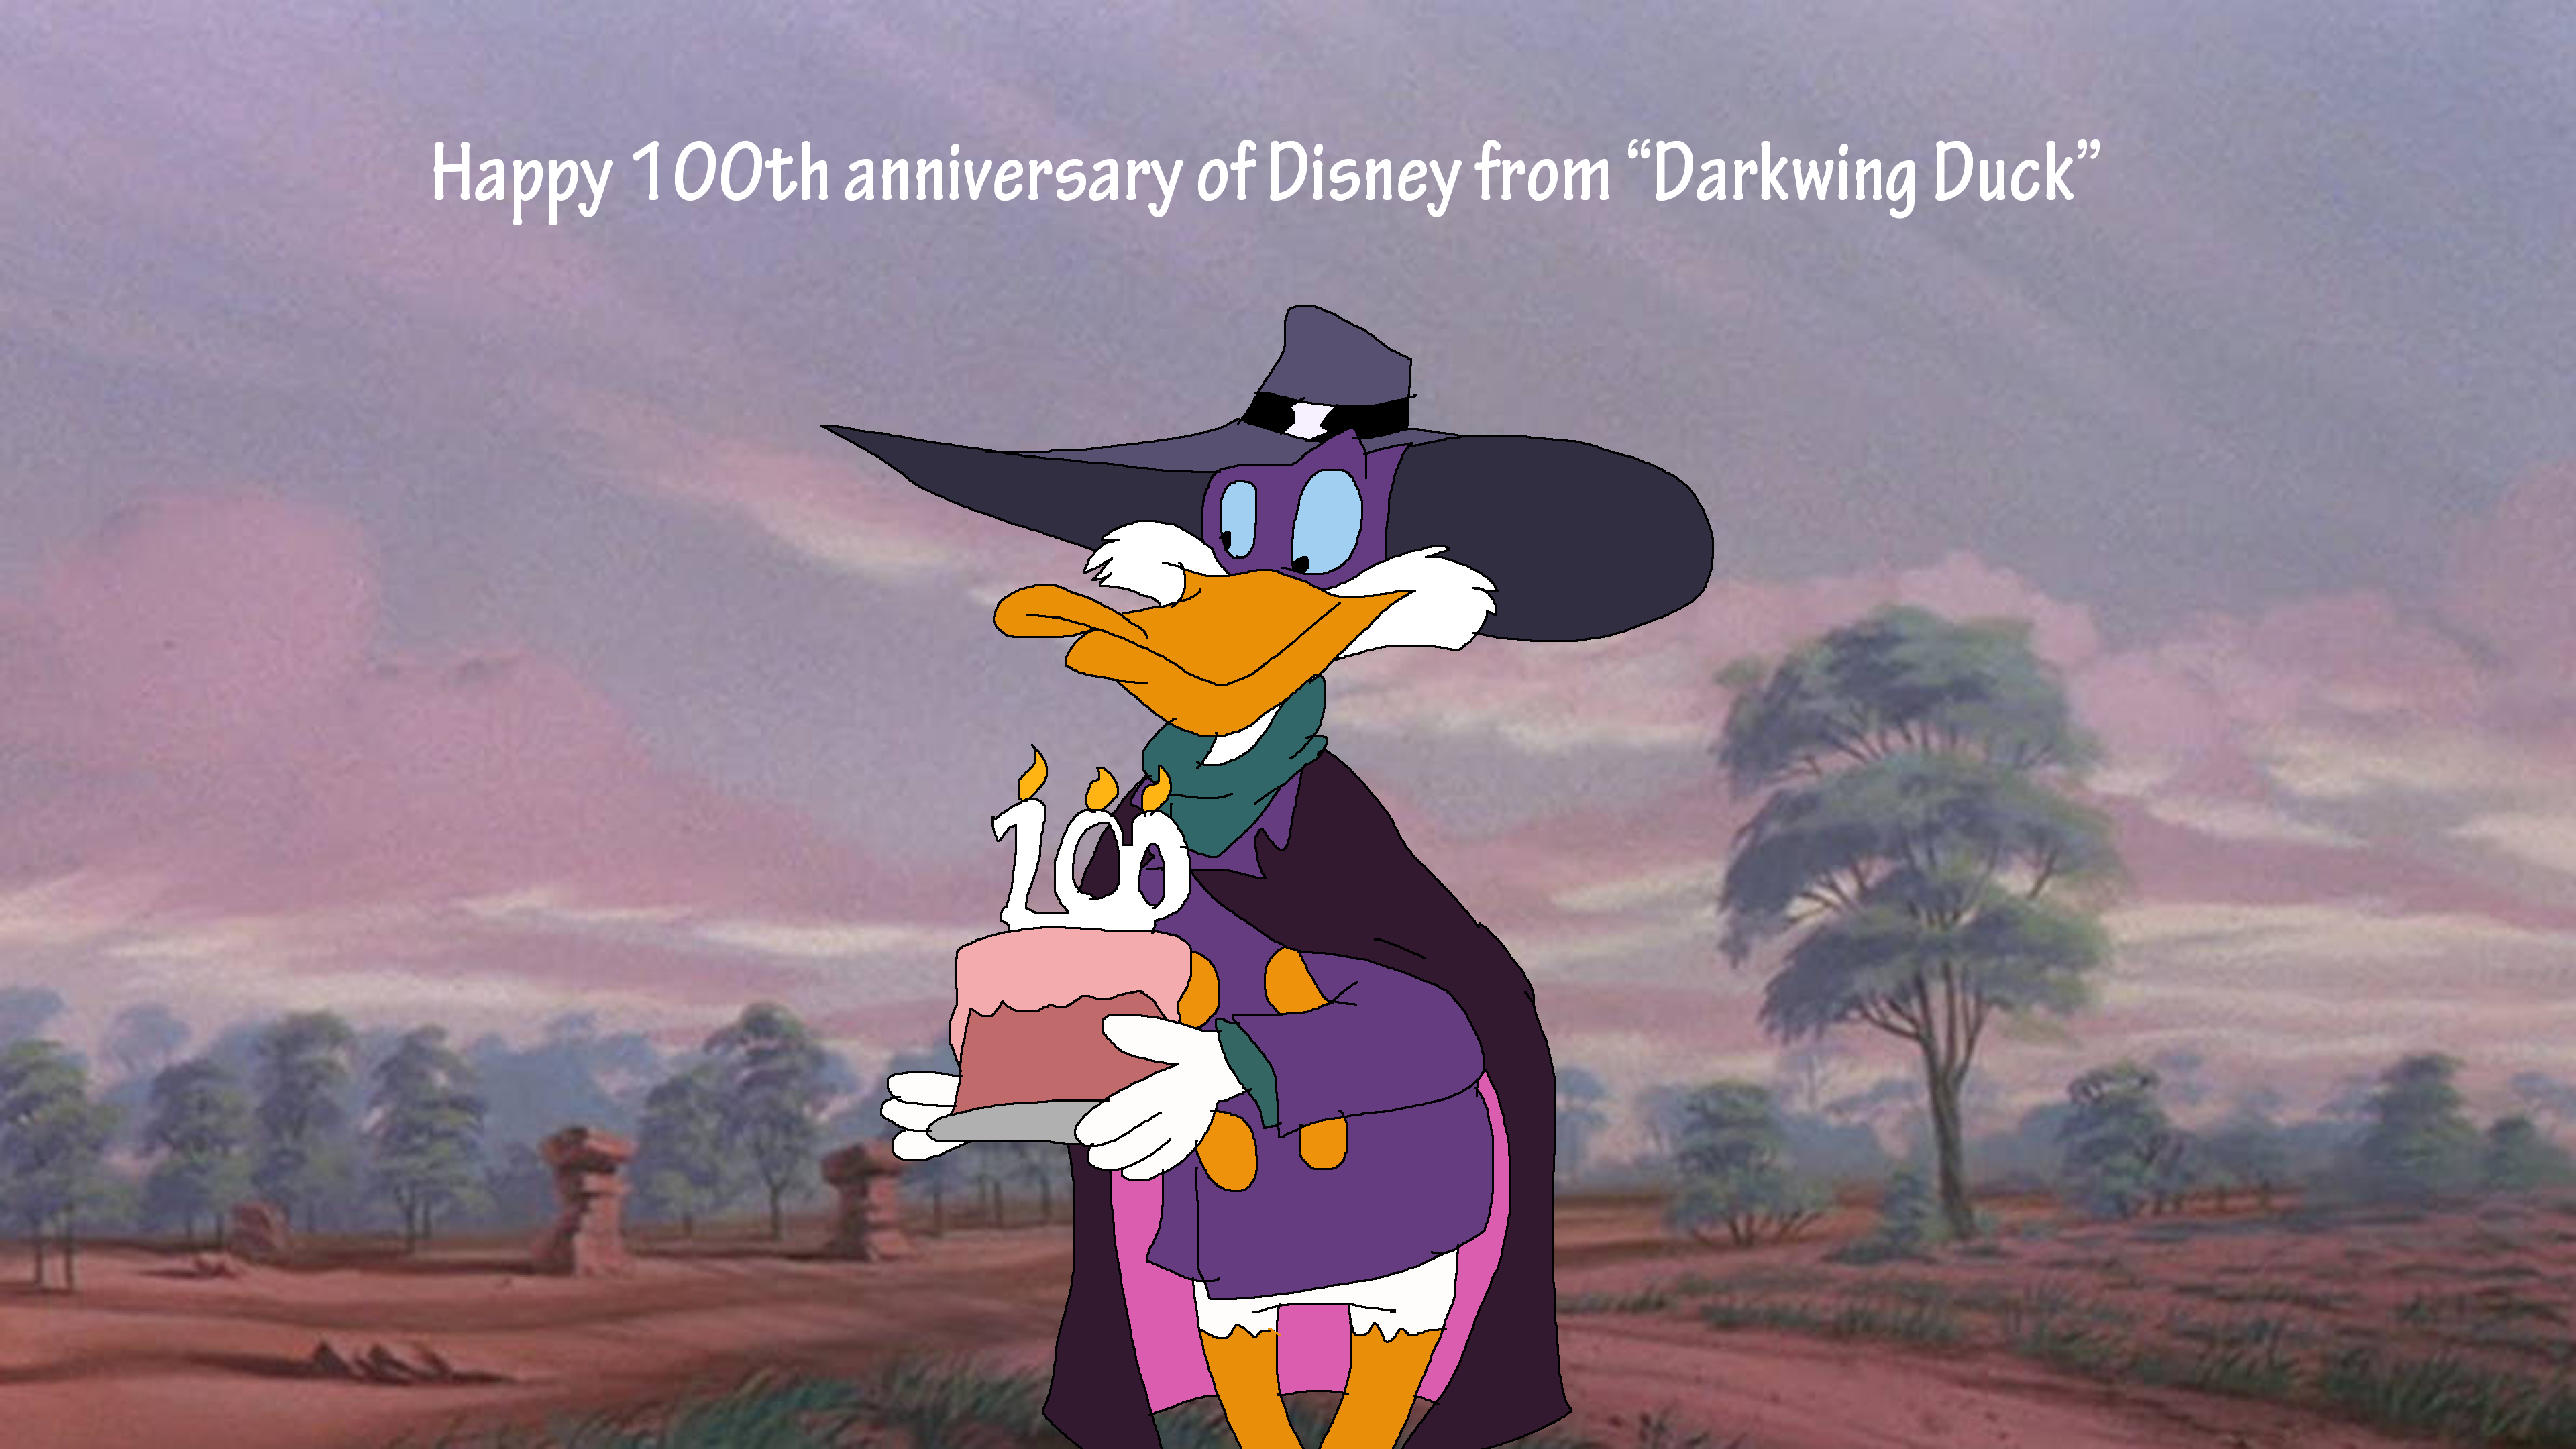 Happy 100th anniversary Disney from Darkwing Duck by